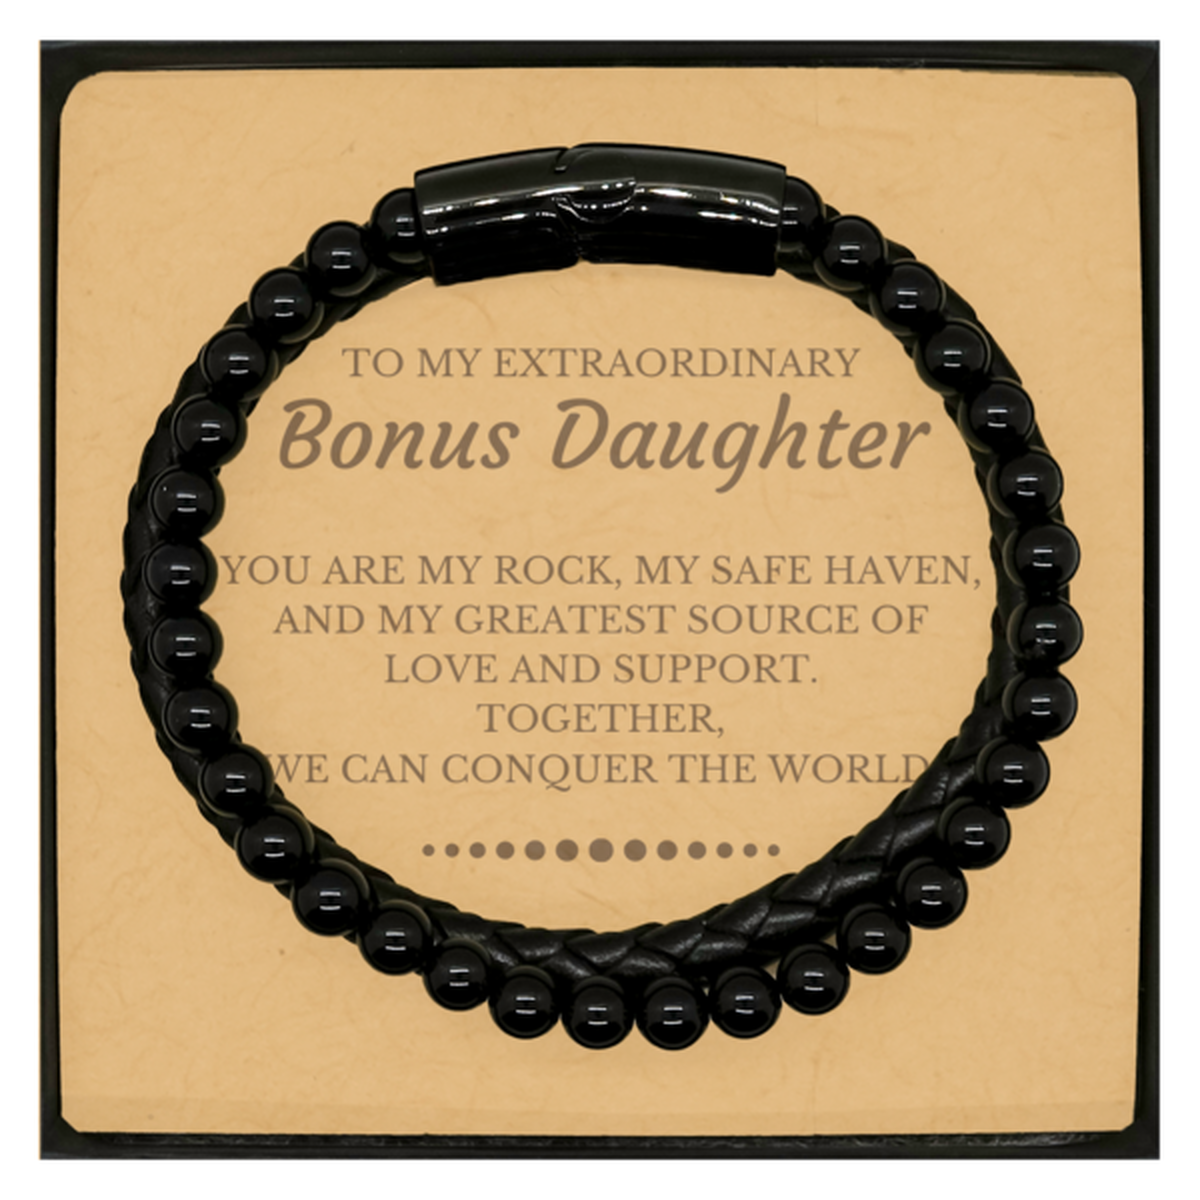 To My Extraordinary Bonus Daughter Gifts, Together, we can conquer the world, Birthday Christmas Stone Leather Bracelets For Bonus Daughter, Christmas Gifts For Bonus Daughter